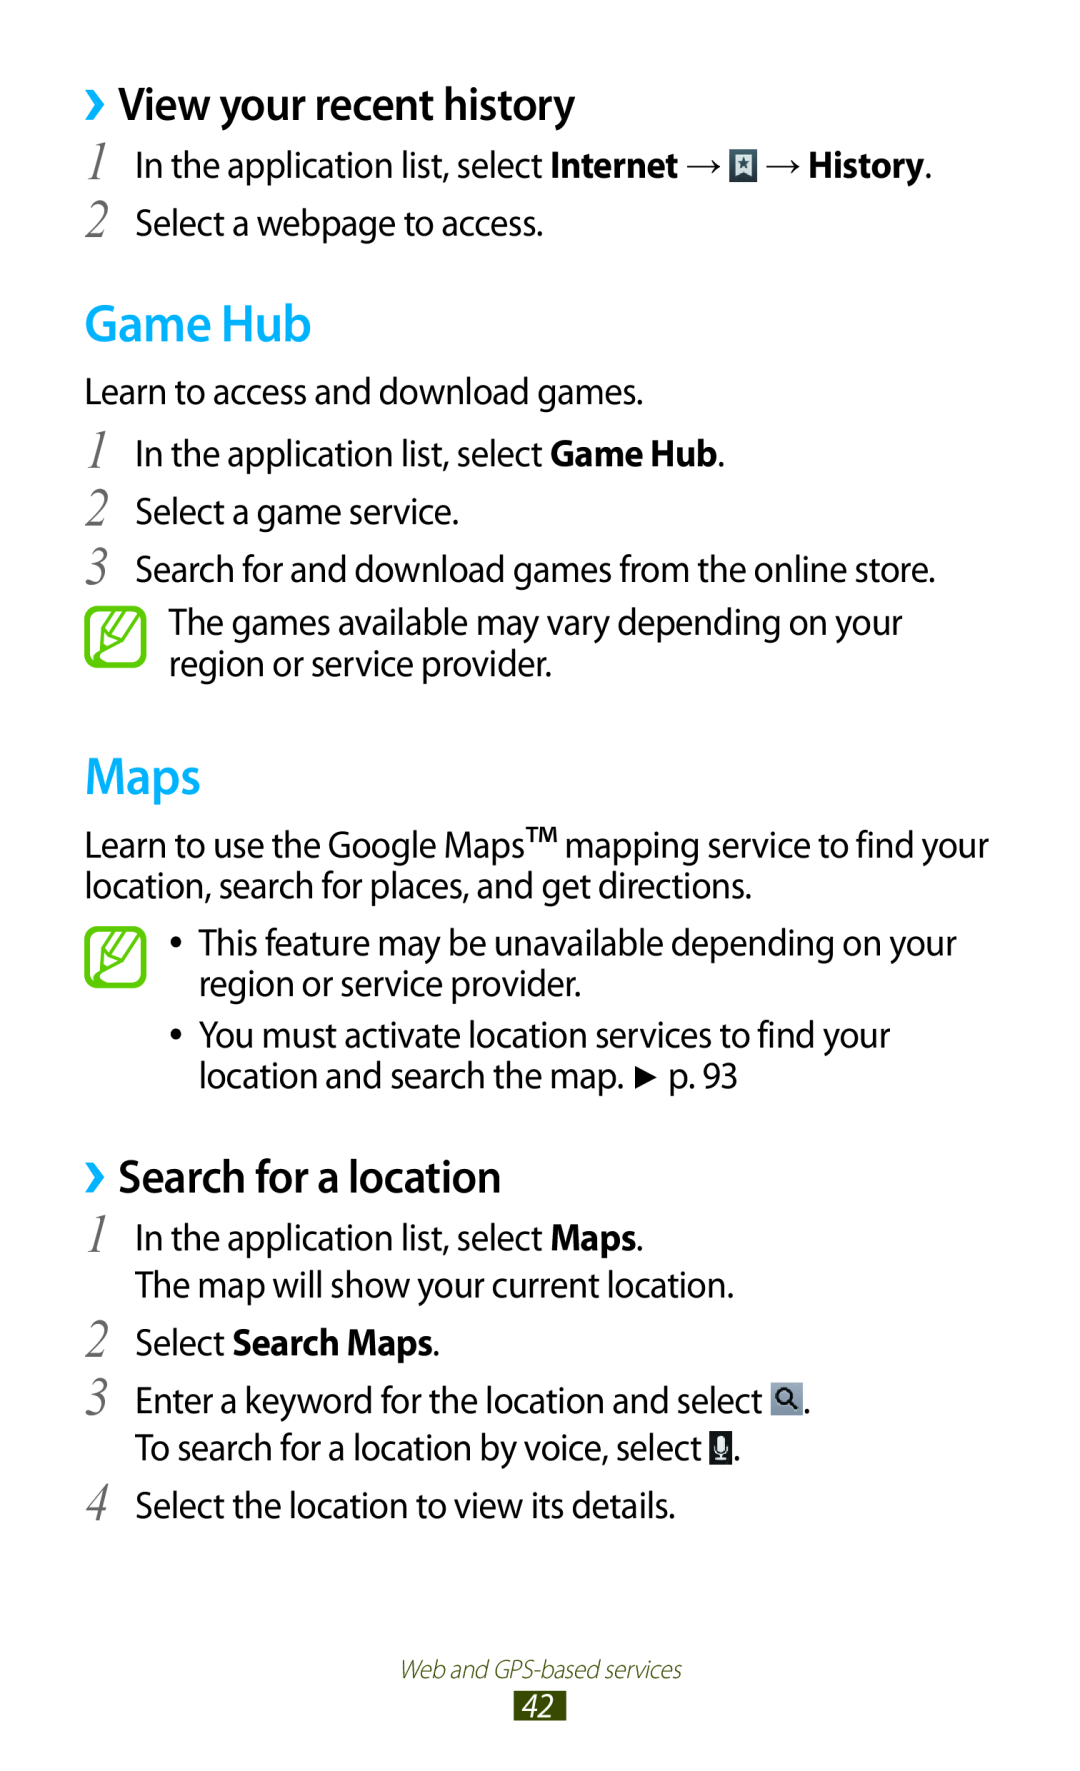 Samsung GTP5110ZWMTTT manual Game Hub, ››View your recent history, ››Search for a location, Select Search Maps 